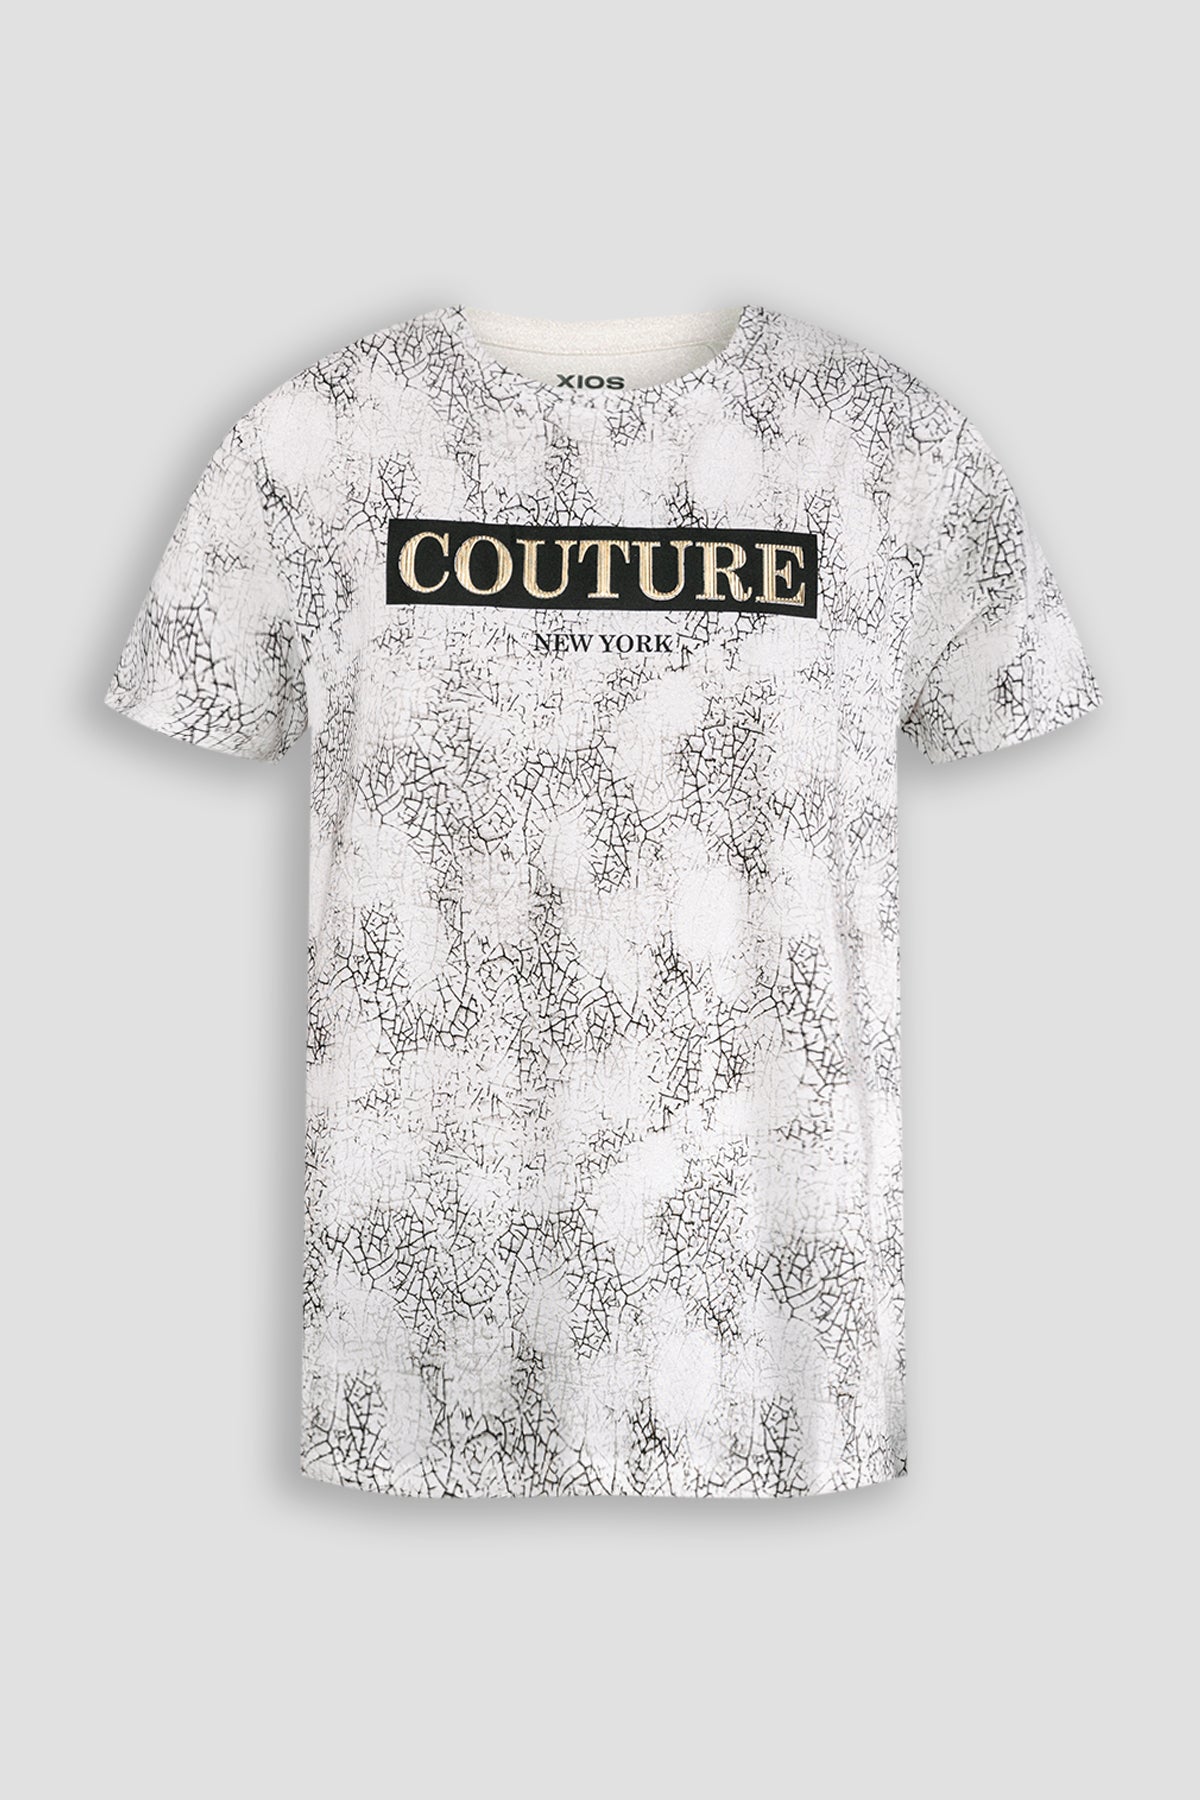 "Couture" Graphic Tee